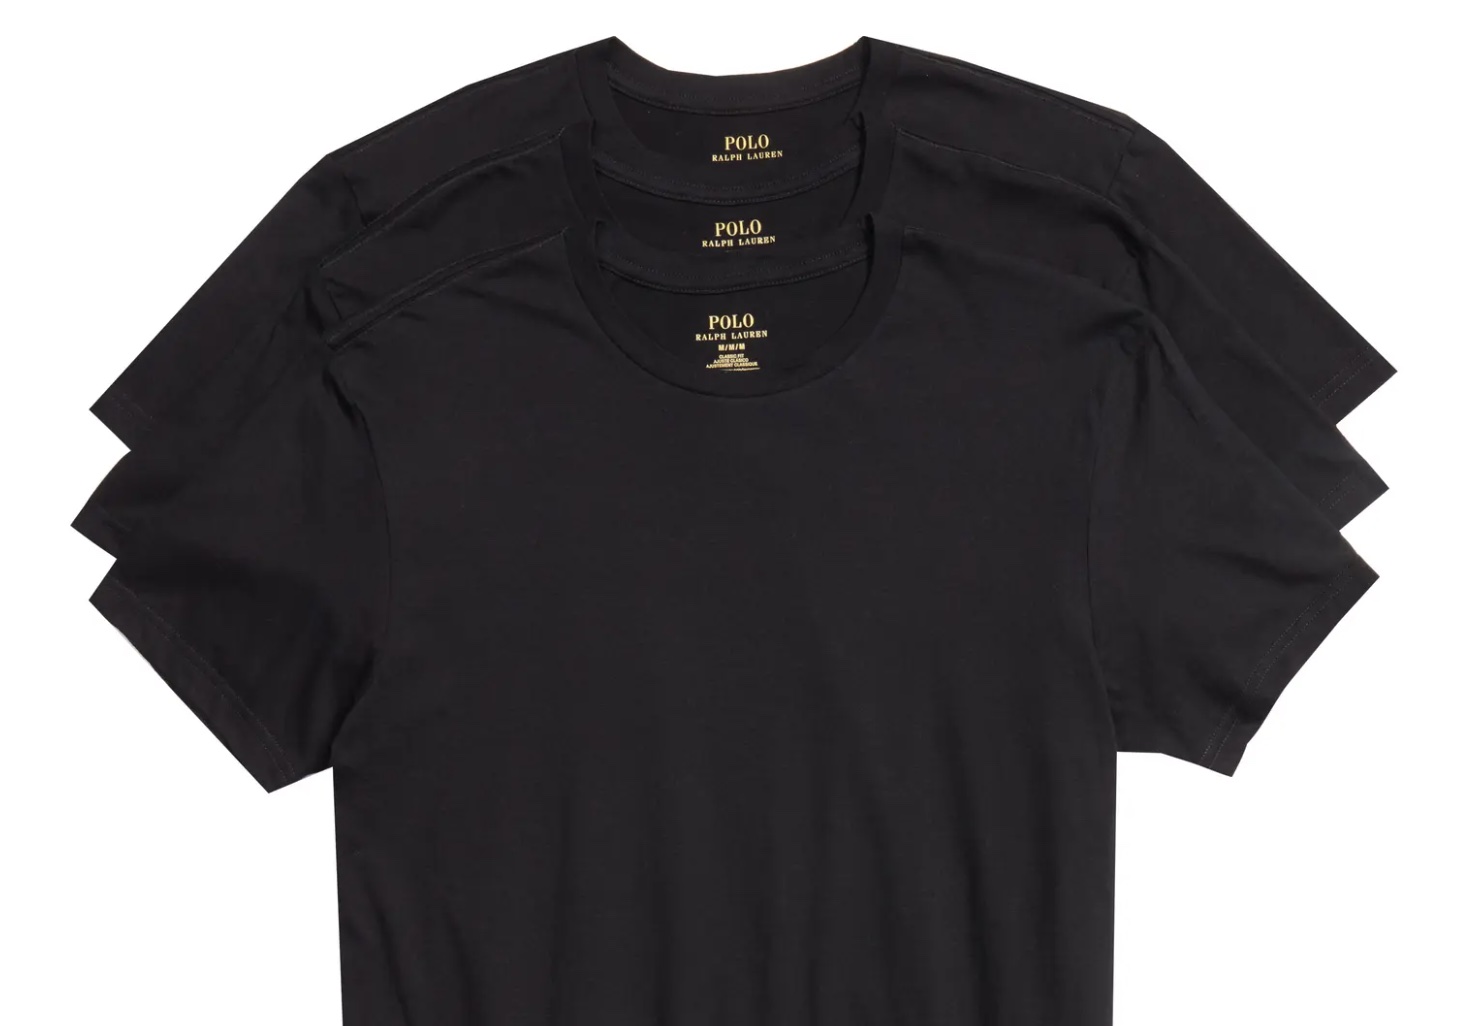 Save 20% on This 3-Pack of Polo T-Shirts at Nordstrom Today - The Manual